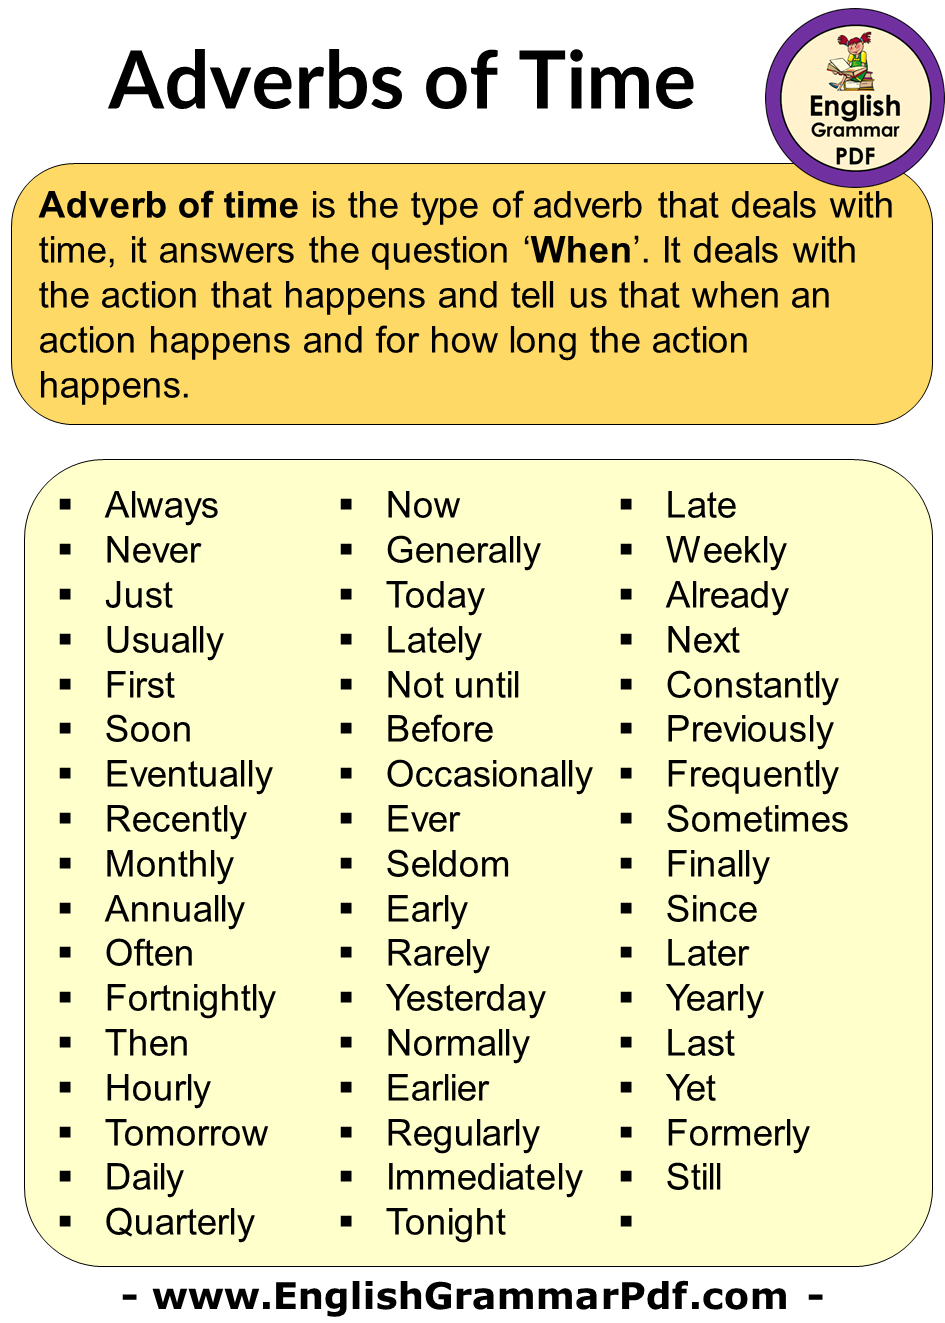 Adverbs Of Time, Definition and 51 Example Words